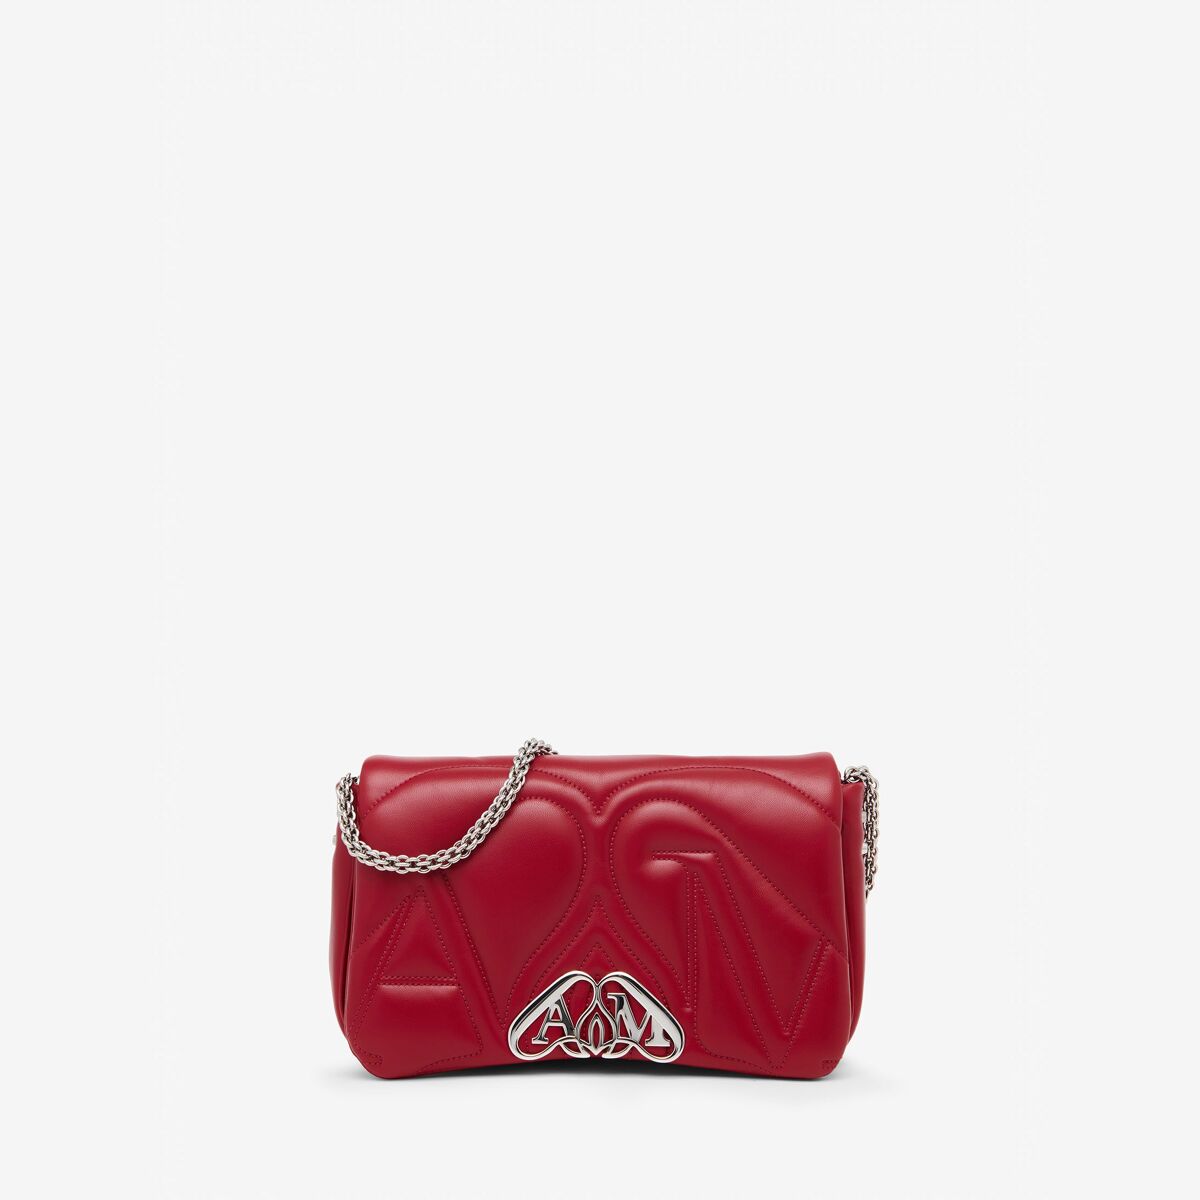 ALEXANDER MCQUEEN - The Seal Small Bag - Item 7573751BLE26210